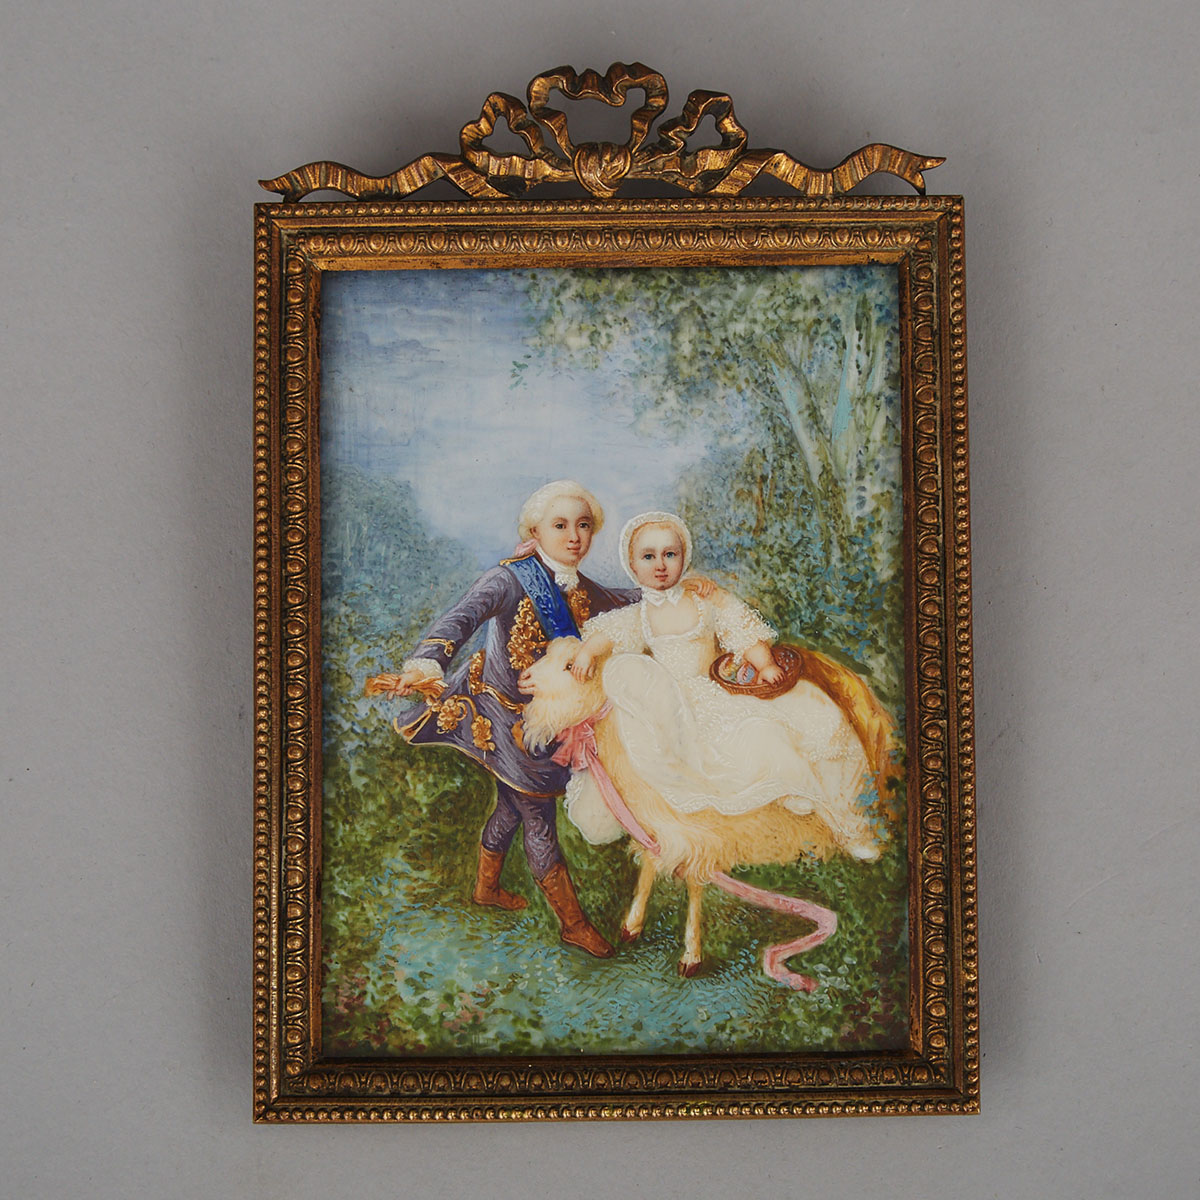 Portrait Miniature on Ivory of the Comte d’Artois (Charles X of France) and His Sister Marie-Clotilde After the Work by François-Hubert Drouais, late 19th century